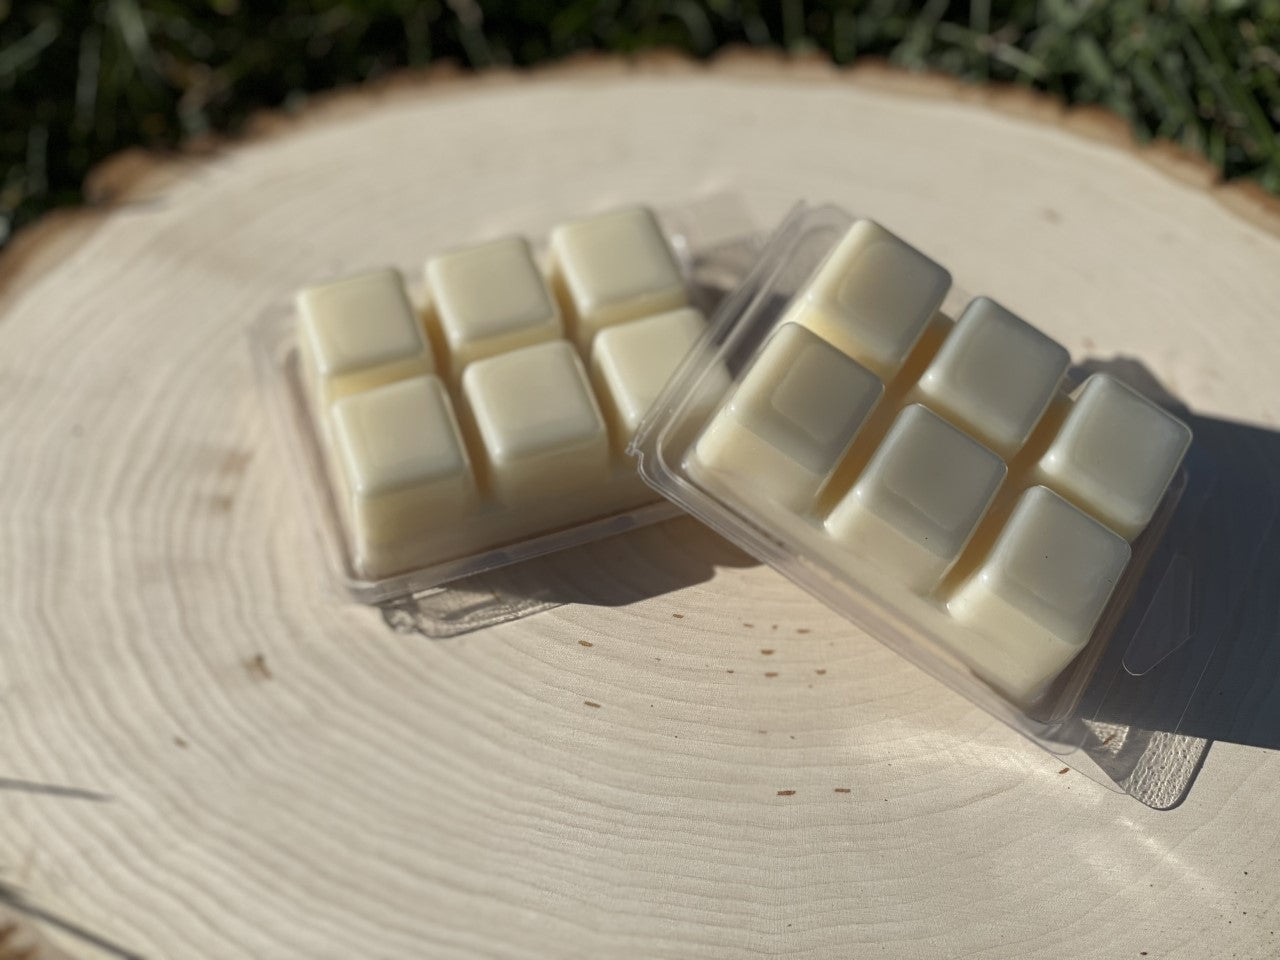 Ginger & Spice Scented | Pure Soy Wax Melt